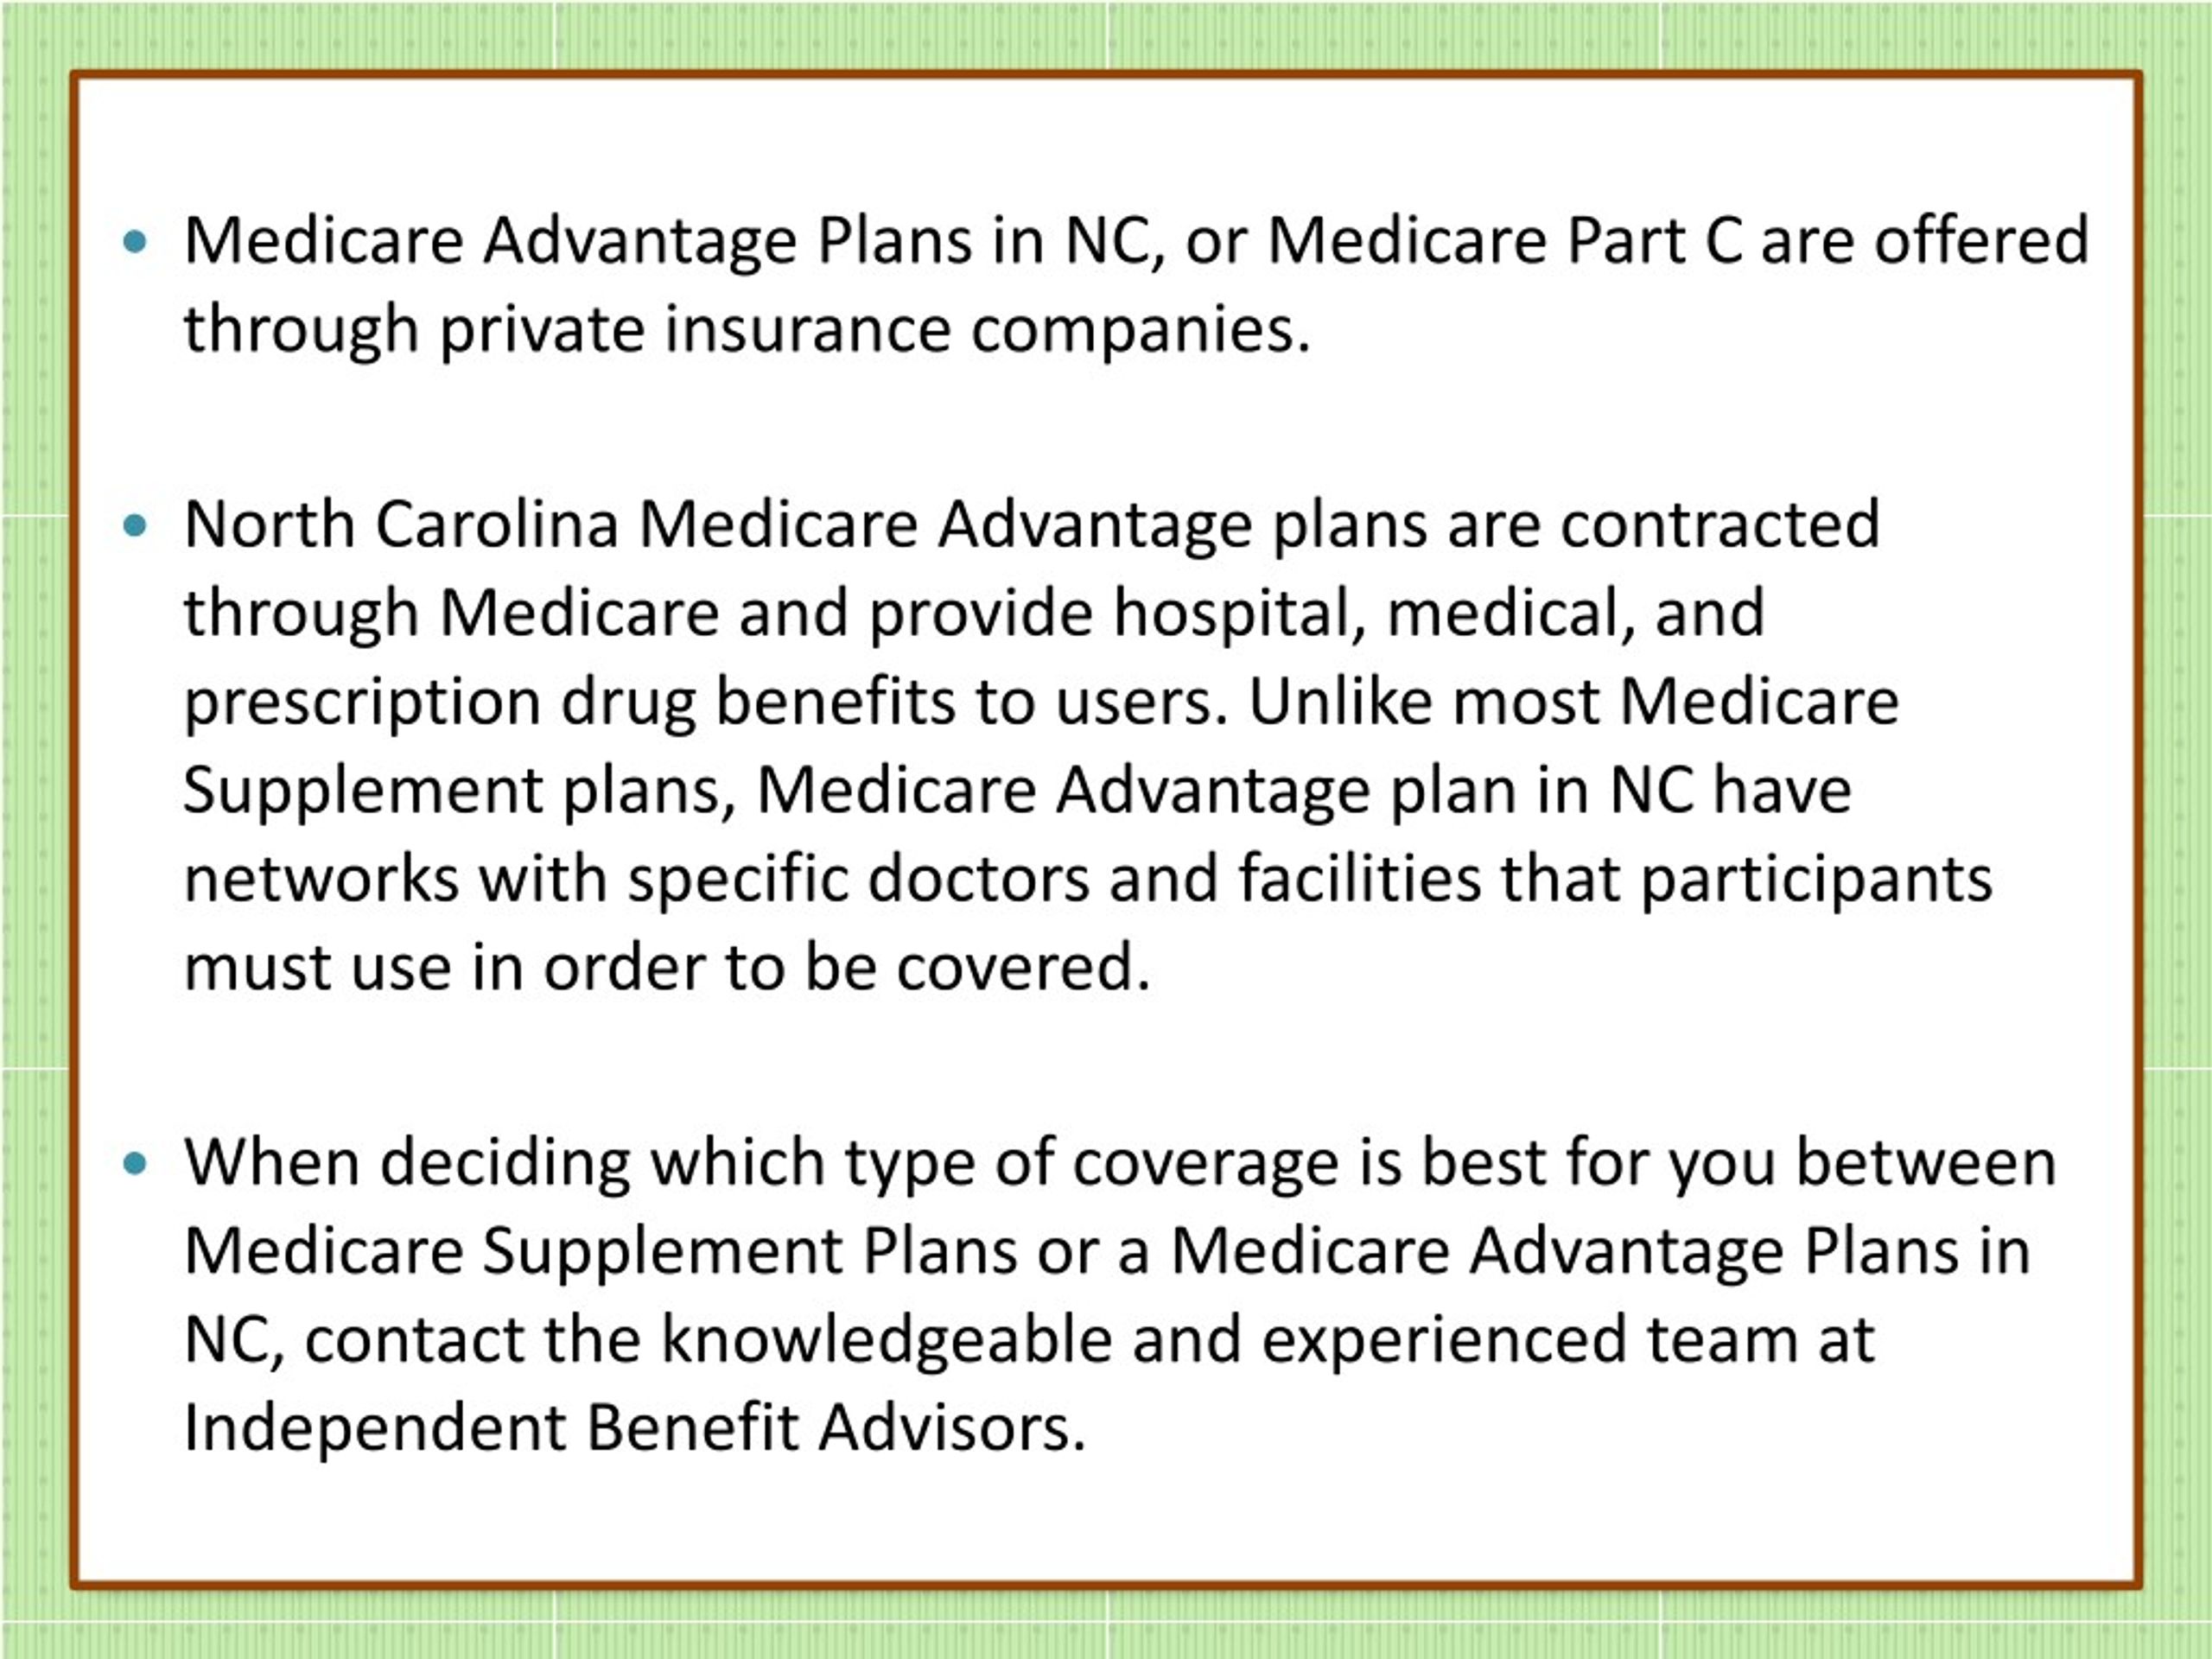 PPT Medicare Advantage Plans in Charlotte, Raleigh, Durham NC